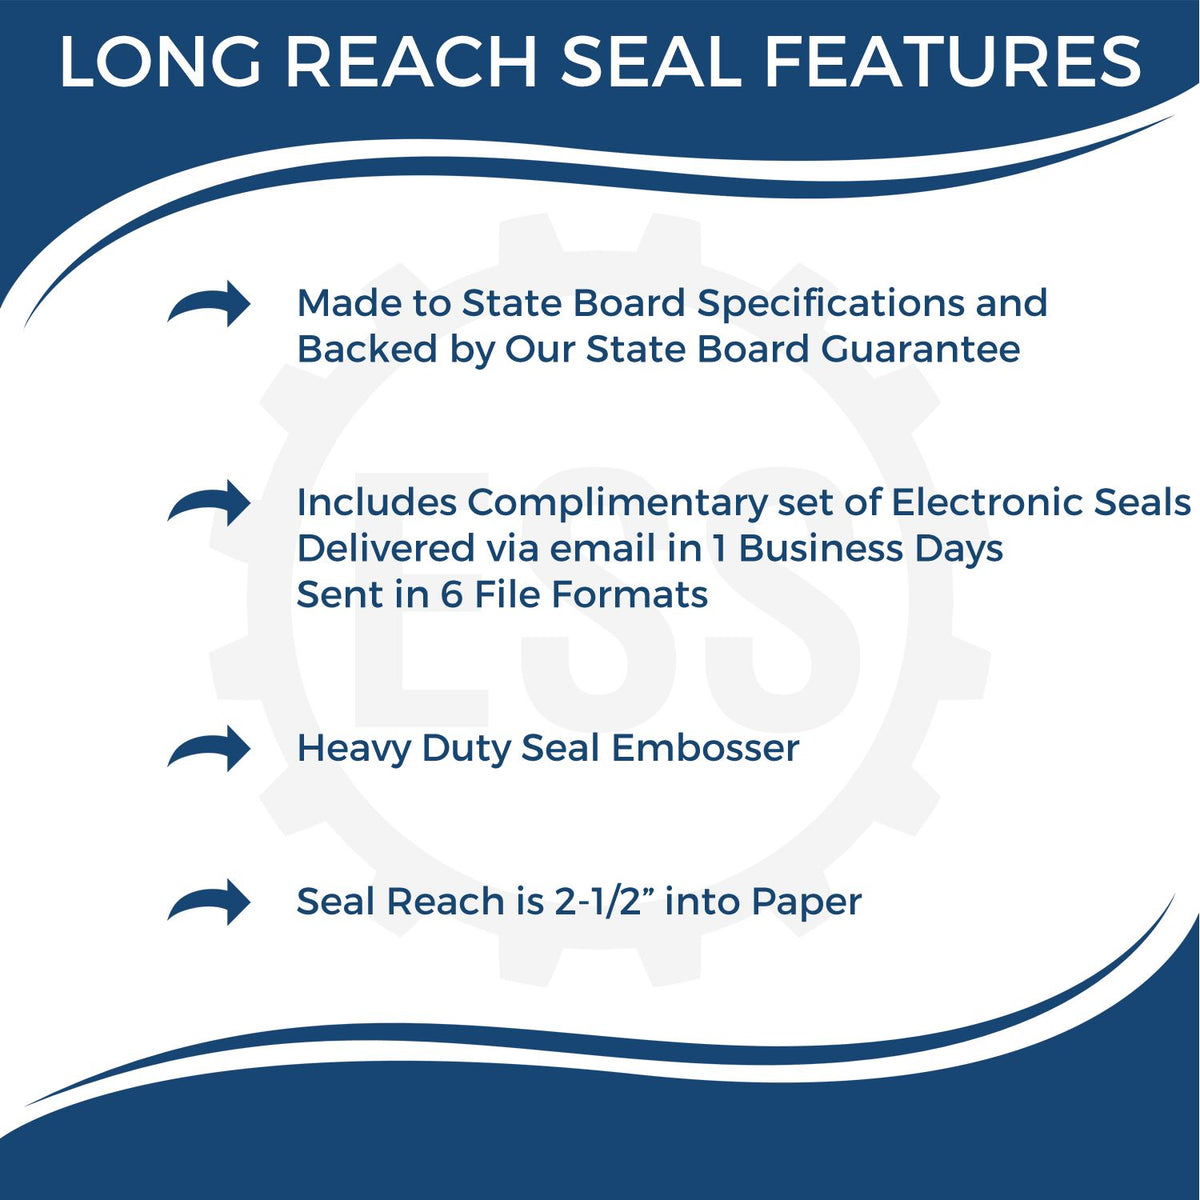 A picture of an infographic highlighting the selling points for the Long Reach Idaho PE Seal